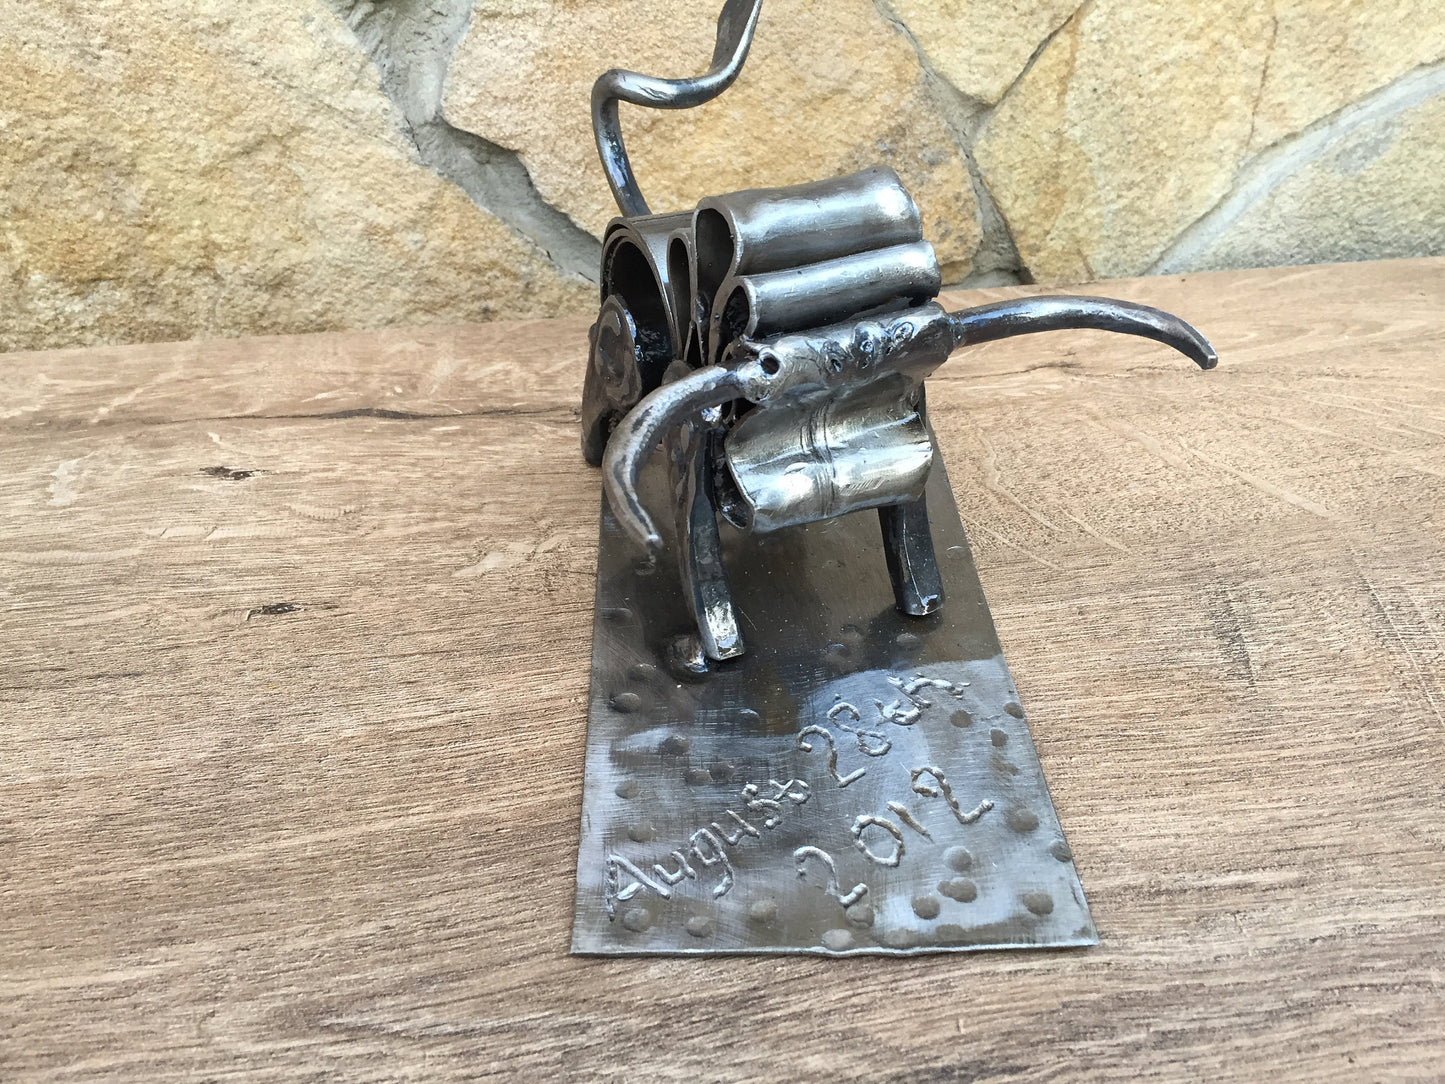 11th anniversary gift, steel anniversary gift for him, 11 year anniversary, steel scroll, partner, for him, for her, favours,love,steel bull